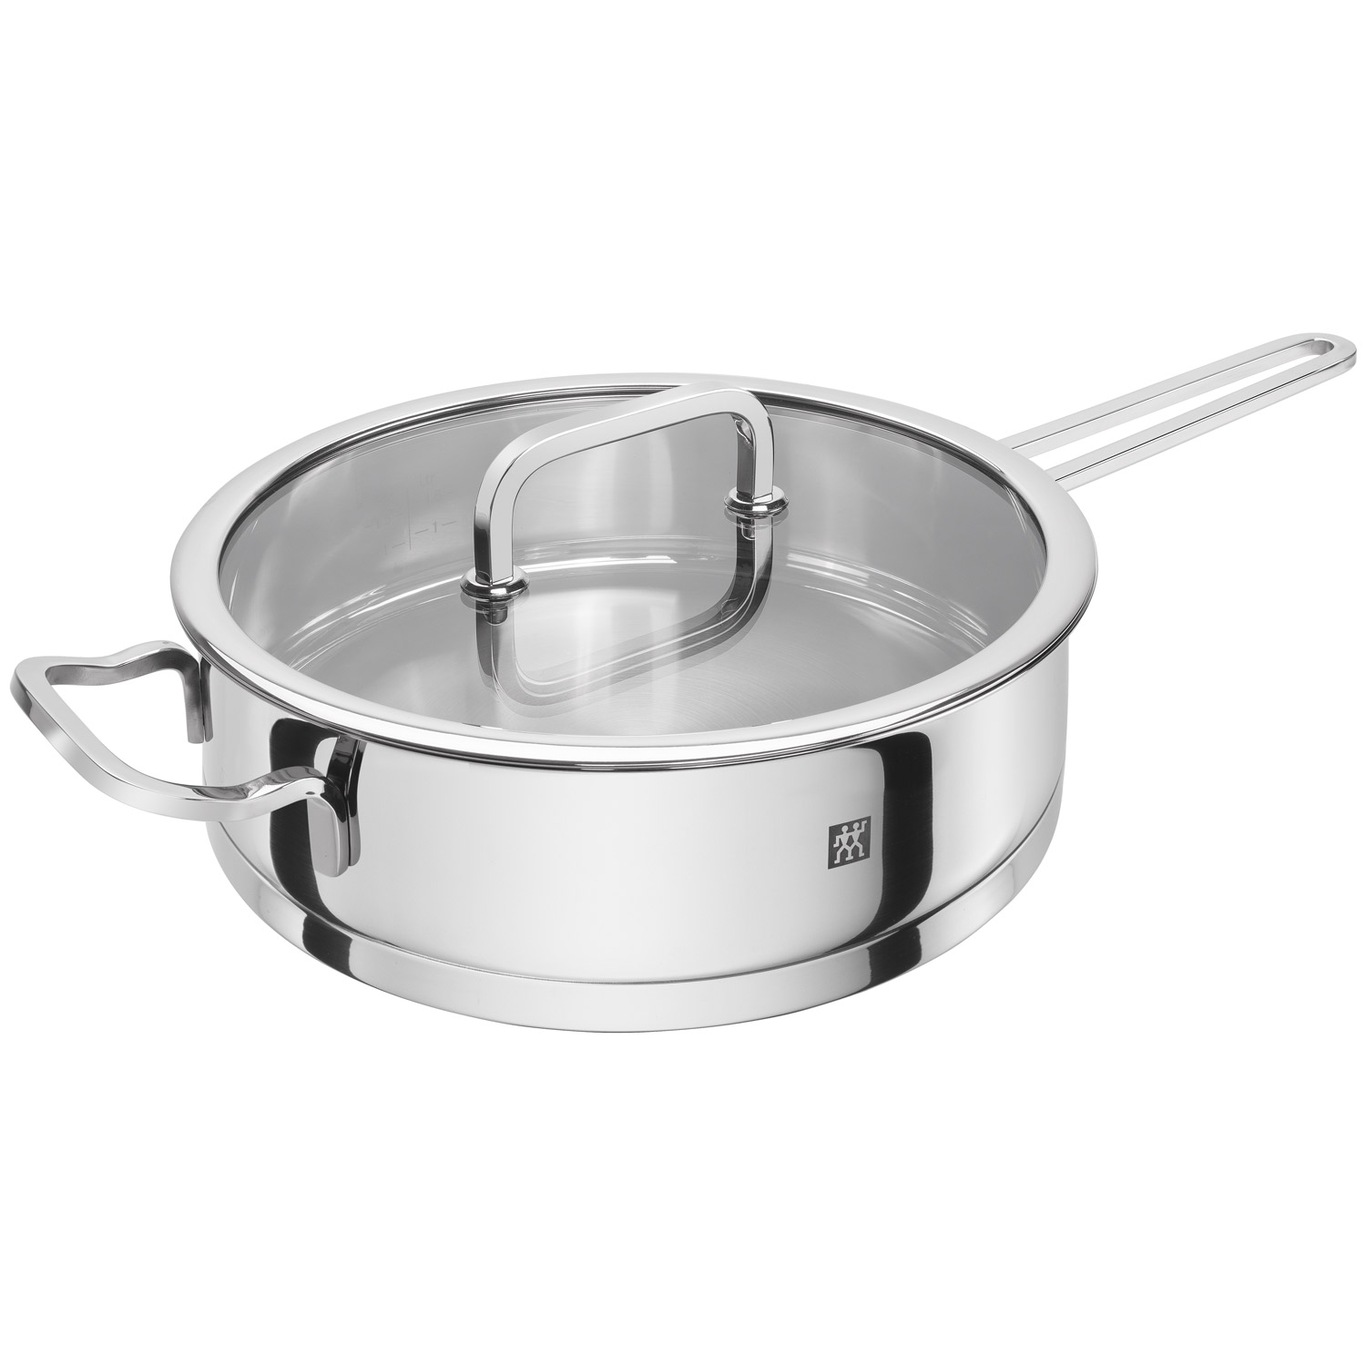 Moment S Saute Pan With Glass Lid Ø24x10 cm - Zwilling @ RoyalDesign